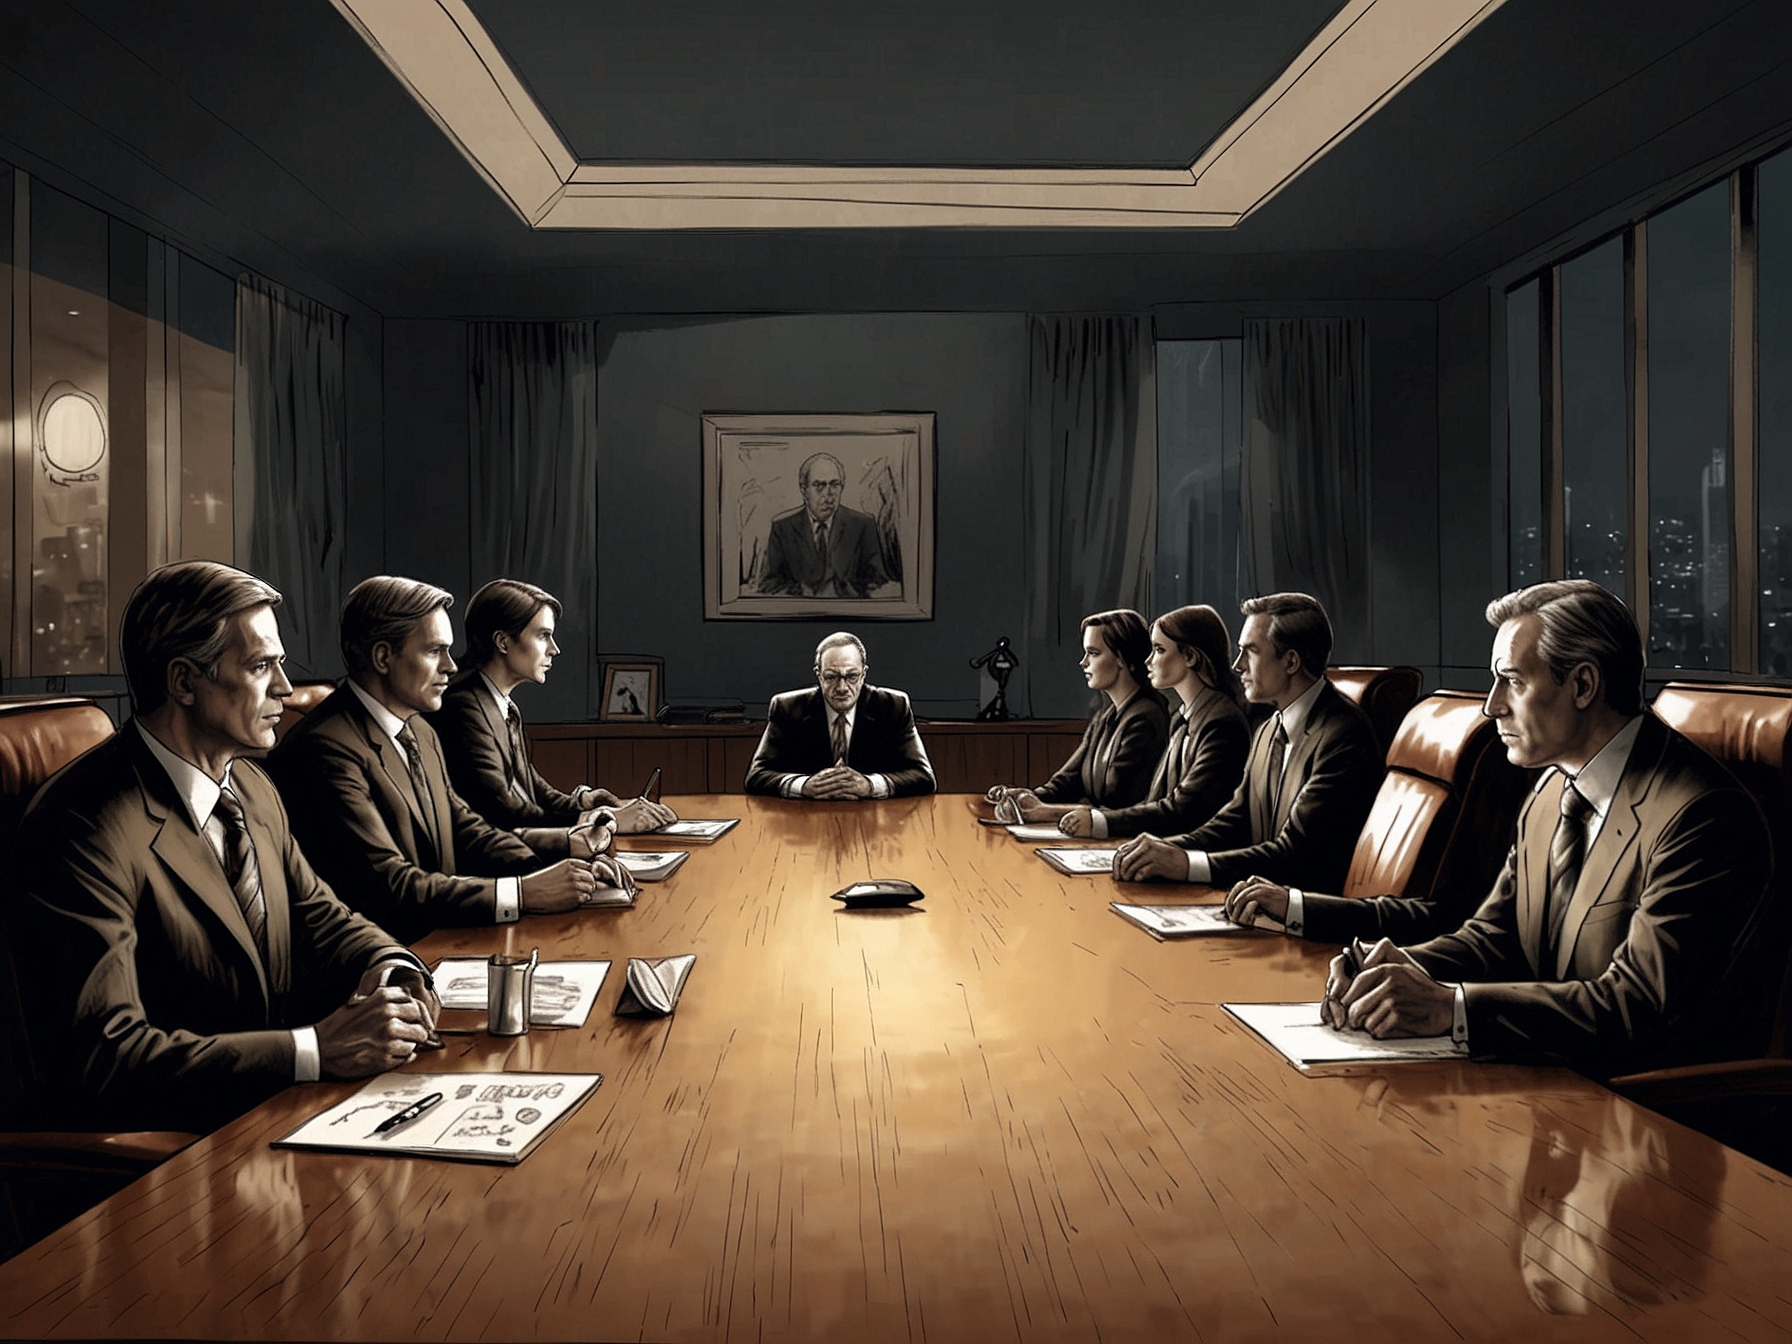 A boardroom meeting with business executives, symbolizing the dark side of international business dealings.